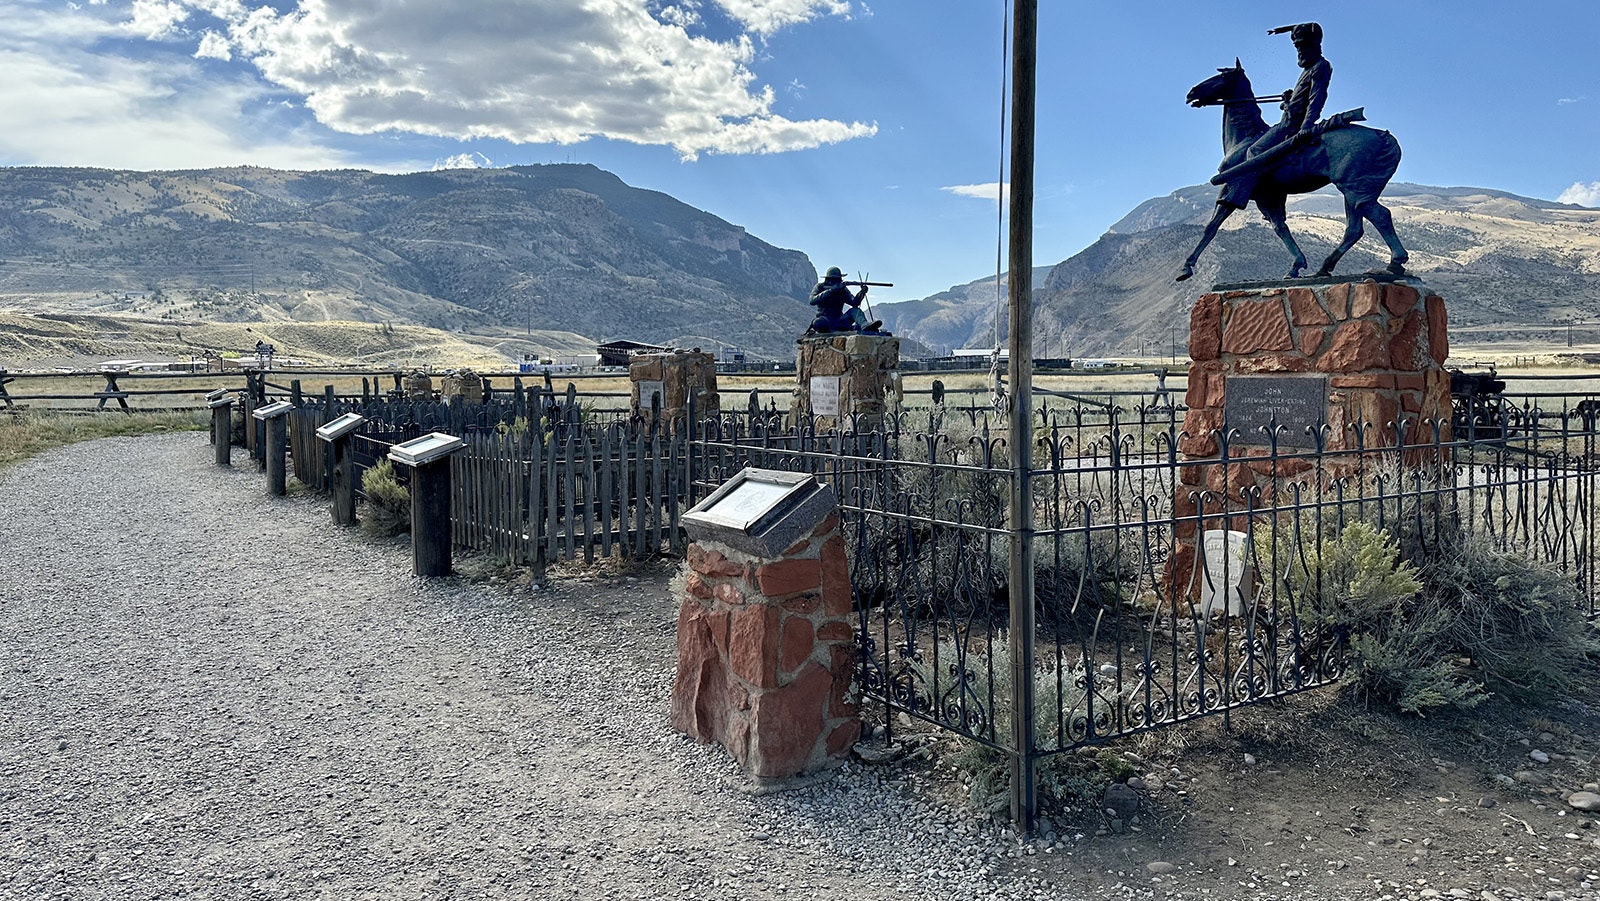 A line of graves at Old Trail Town. Seven people have been moved from where they were originally buried and reinterred at Old Trail Town because of their historical connections to the buildings on site or the American West overall.